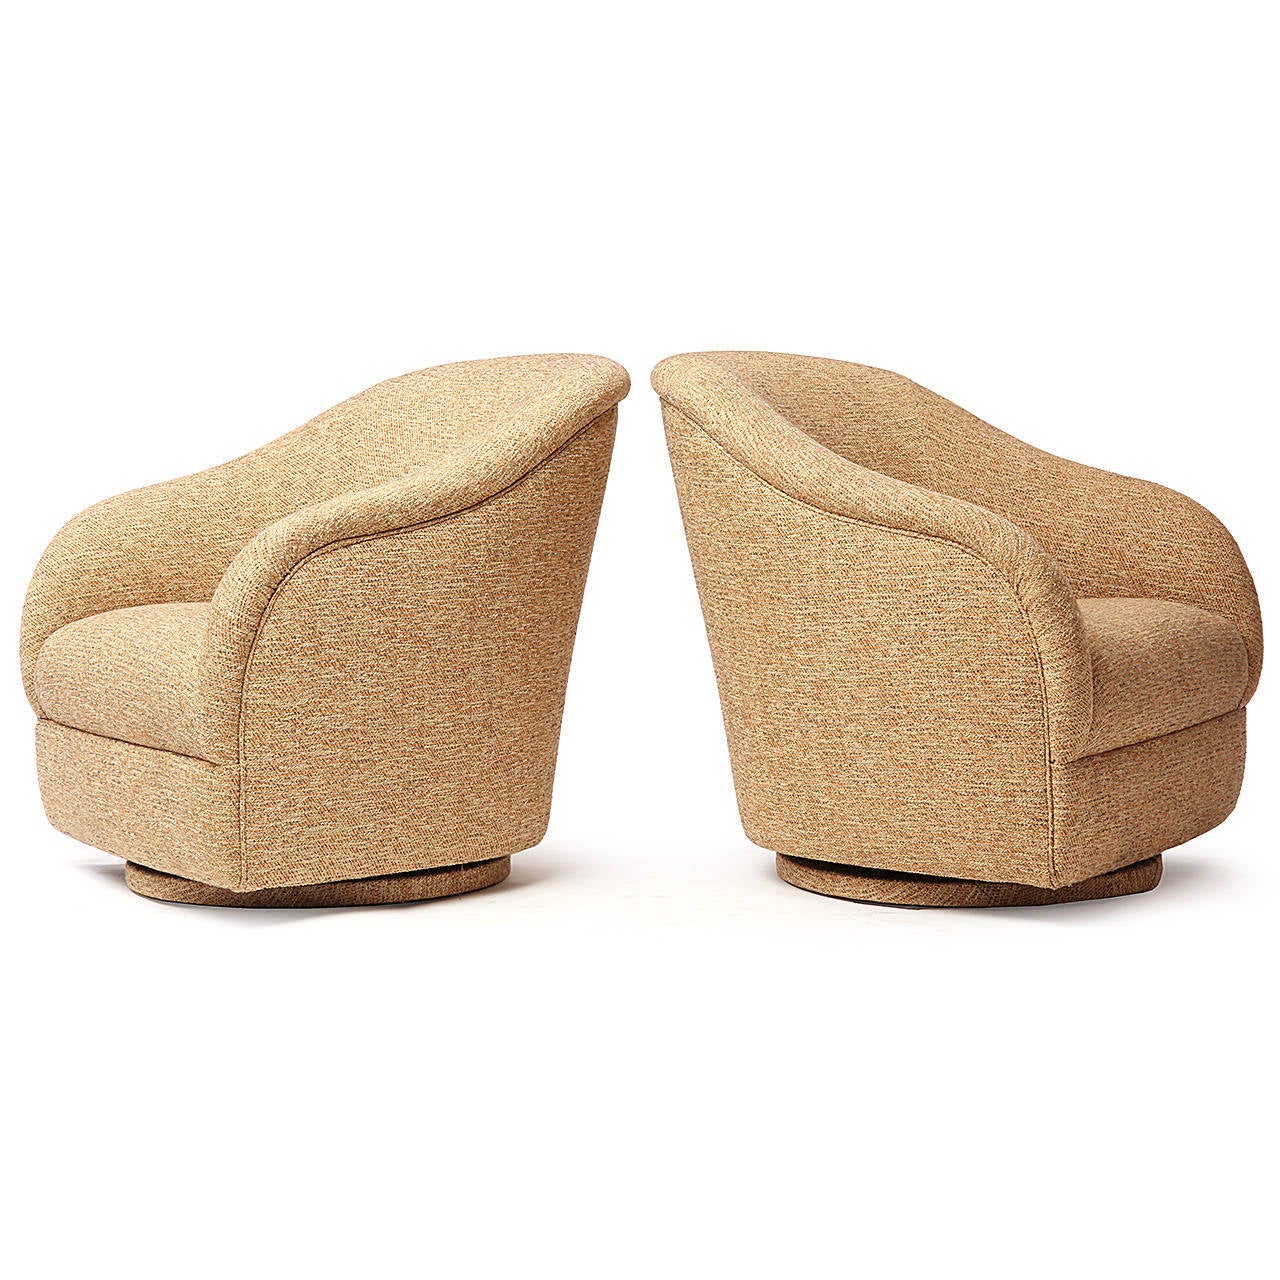 A sculptural and beautifully proportioned pair of swiveling lounge chairs on disc bases finely upholstered in an earth-toned textured bouclé.